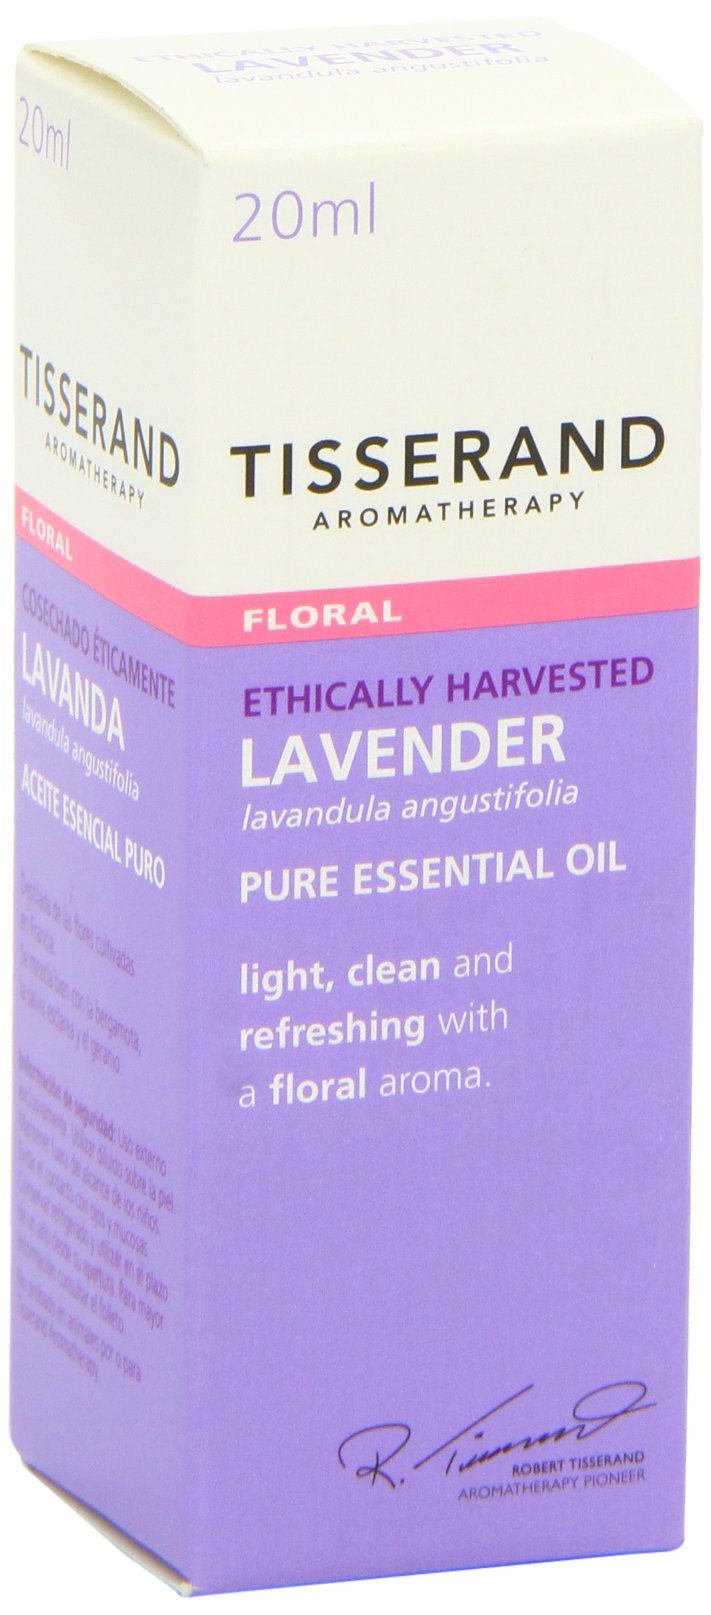 Tisserand Aromatherapy - Lavender Essential Oil - Ethically Harvested - 100% Pure Essential Oil - 20 ml 20 ml (Pack of 1) - BeesActive Australia